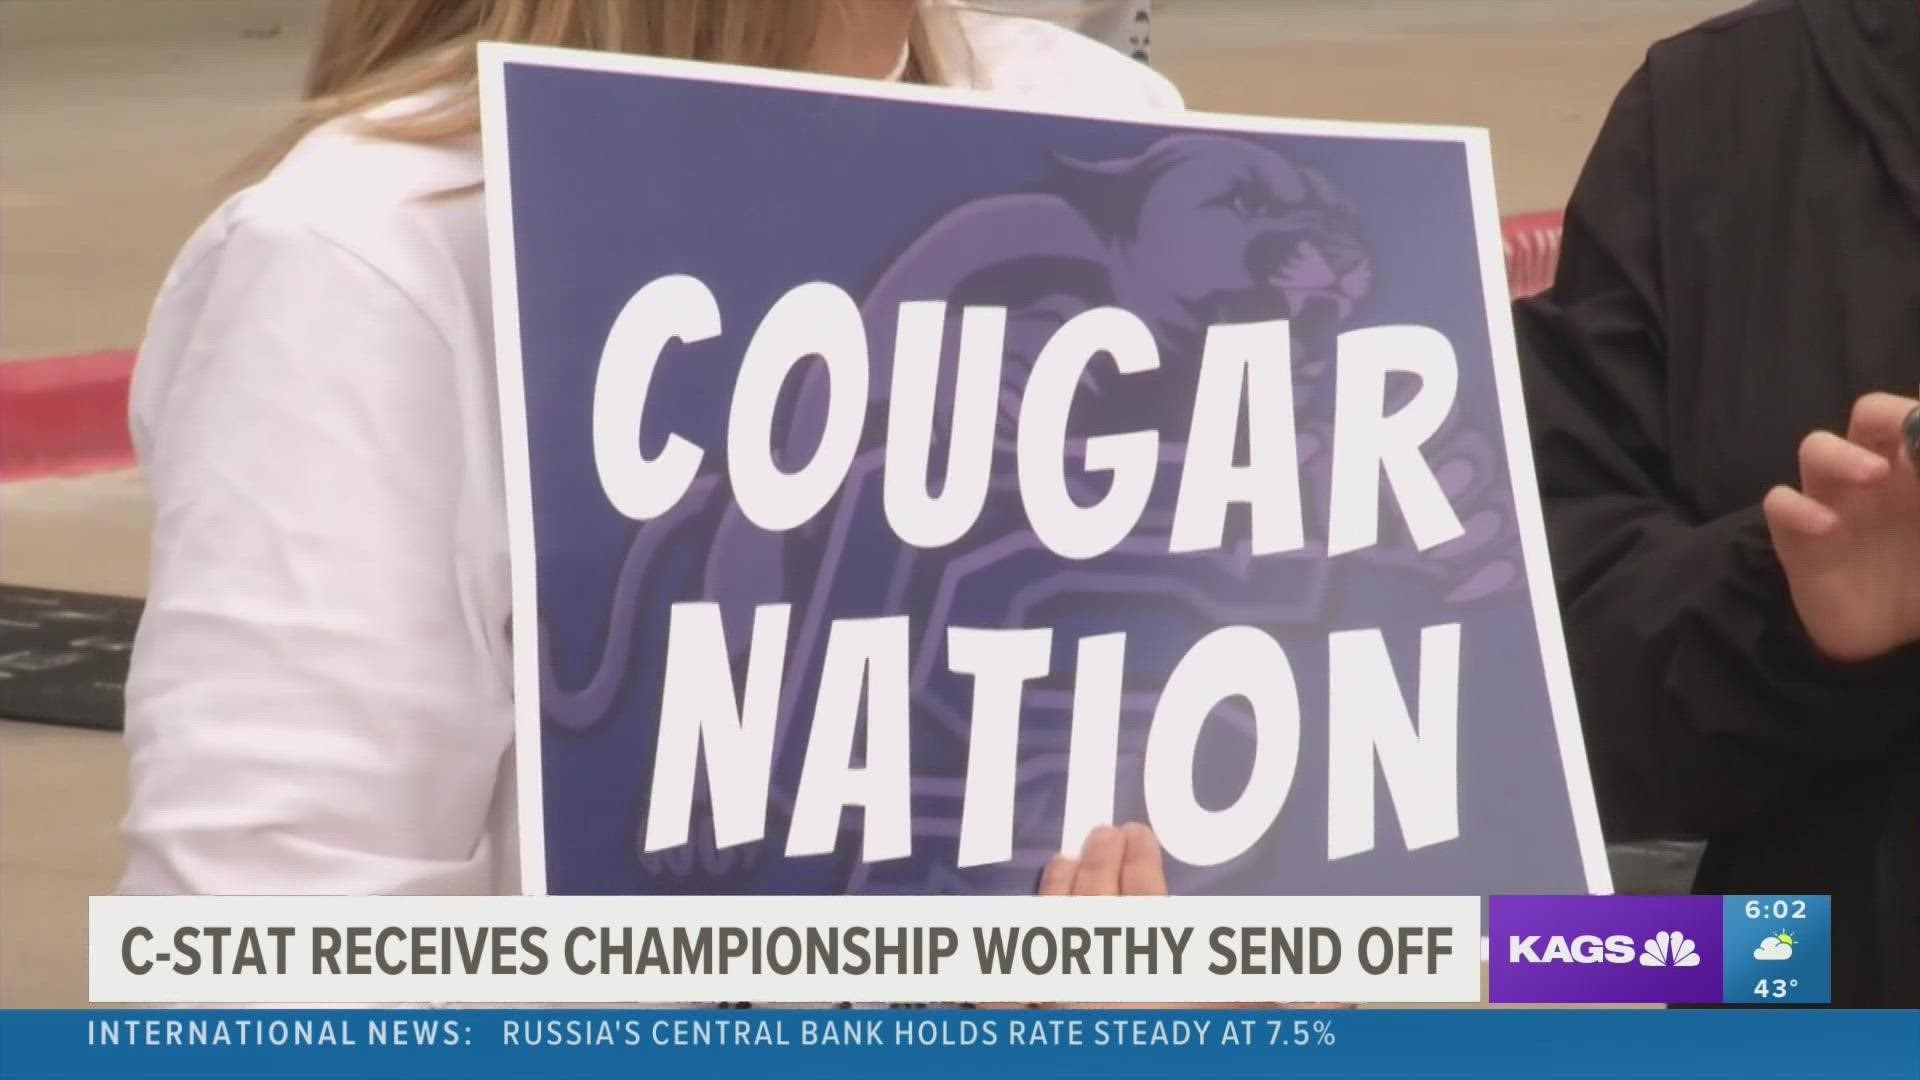 Despite the last day of the semester and finals being on the minds of students, the College Station Cougars got a send-off for their championship match this Saturday